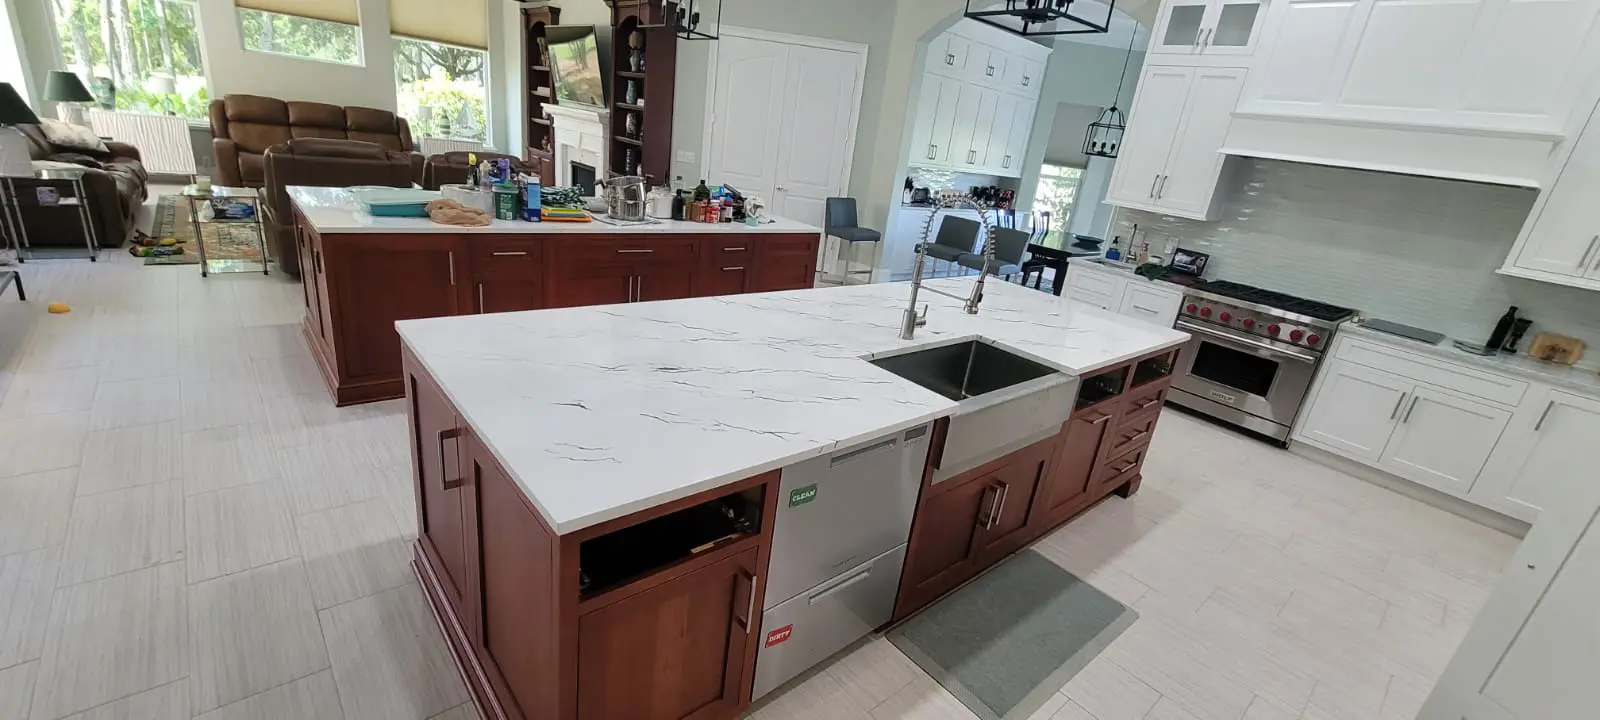 A large kitchen with white counters and wooden cabinets.